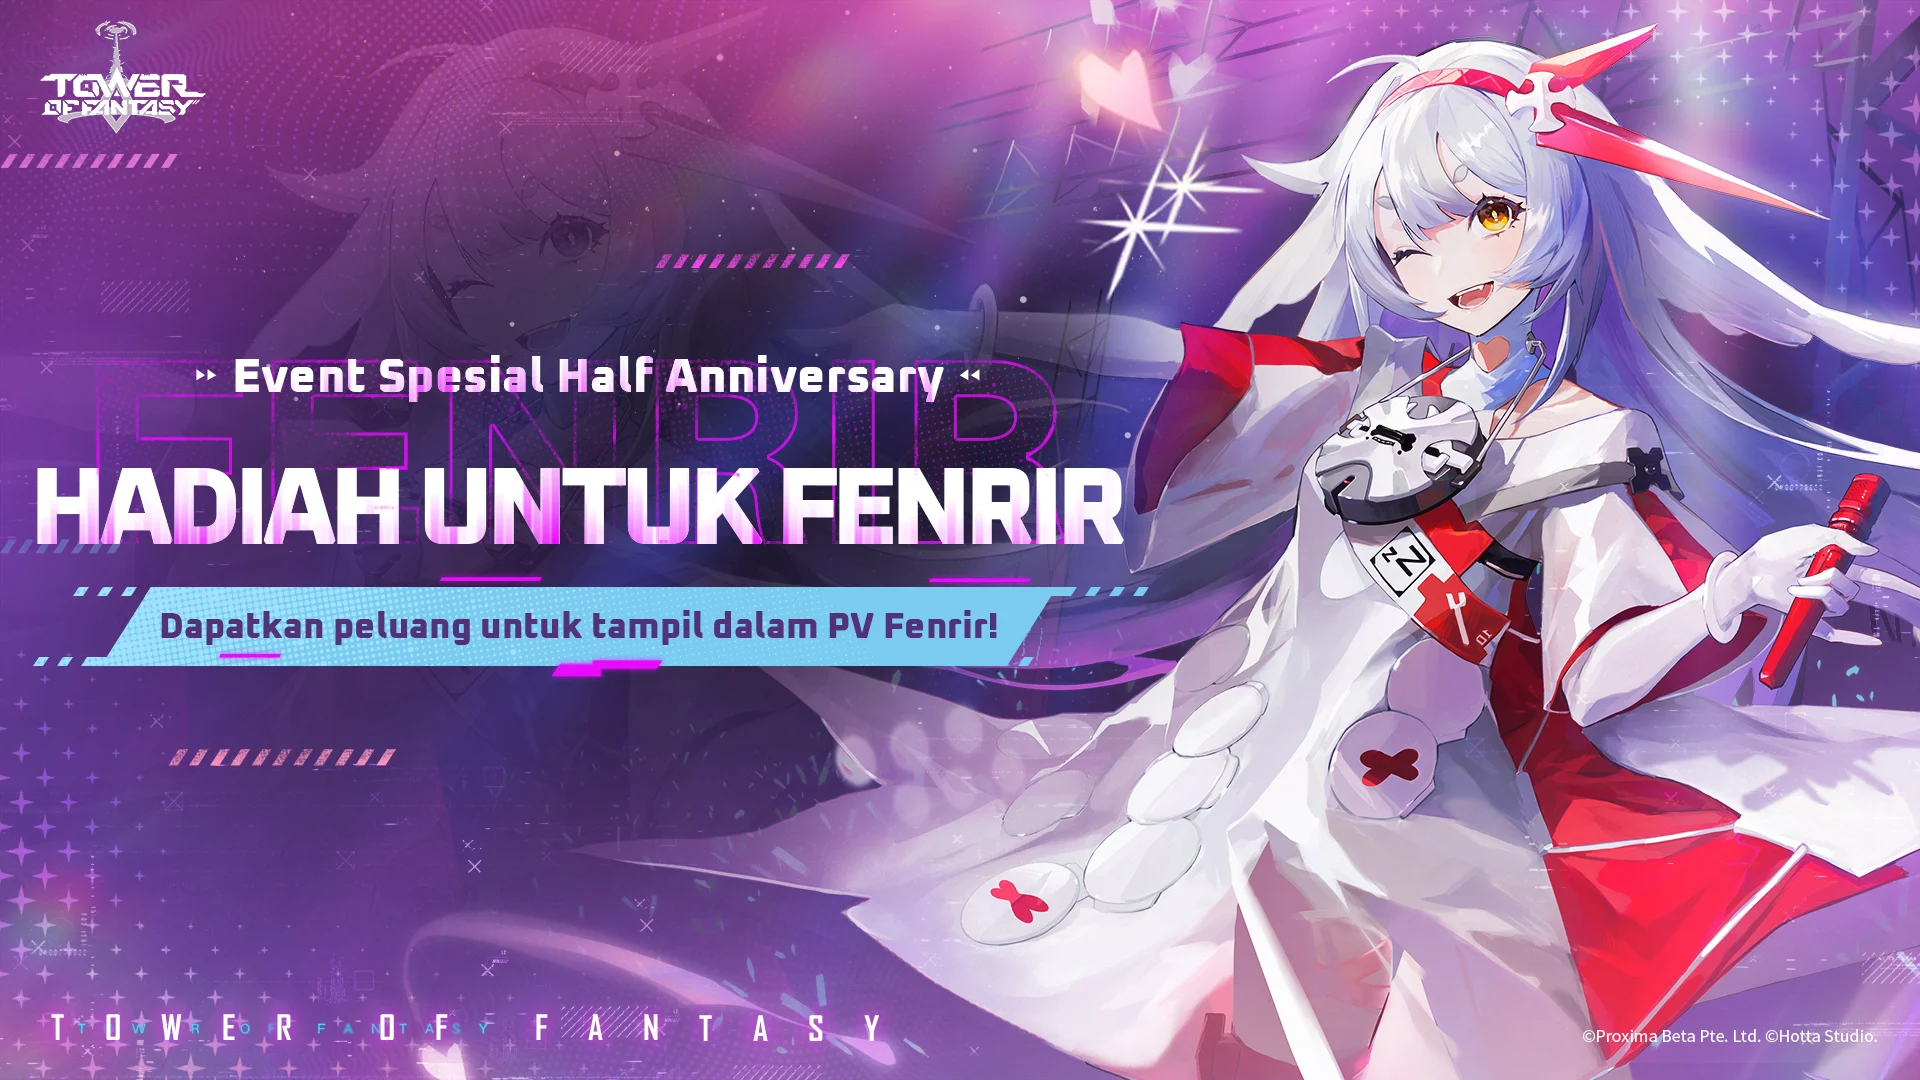 Tower Of Fantasy HOW TO BE IN FENRIR'S PV?!! FREE DARK CRYSTALS!!: